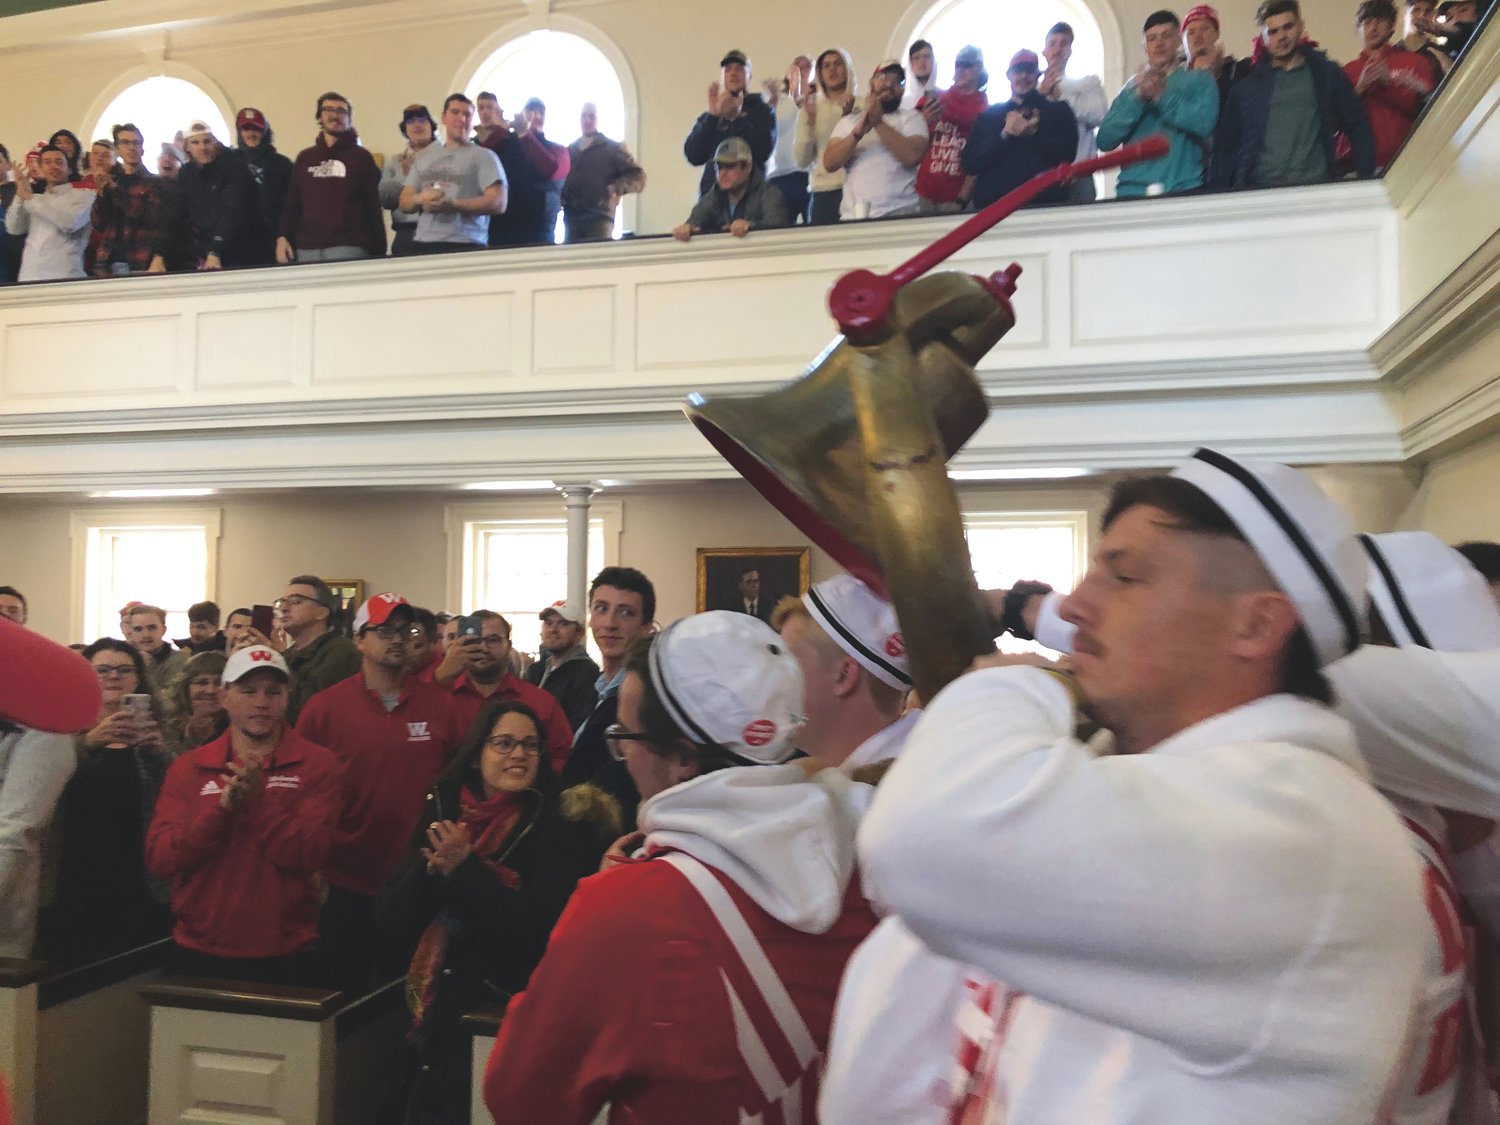 Members of the Wabash Sphinx Club carry the Monon Bell into the Wabash Chapel on Thursday morning for the annual Bell Week Chapel. The Little Giants travel to Greencastle on Saturday for the 126th annual Monon Bell Classic.